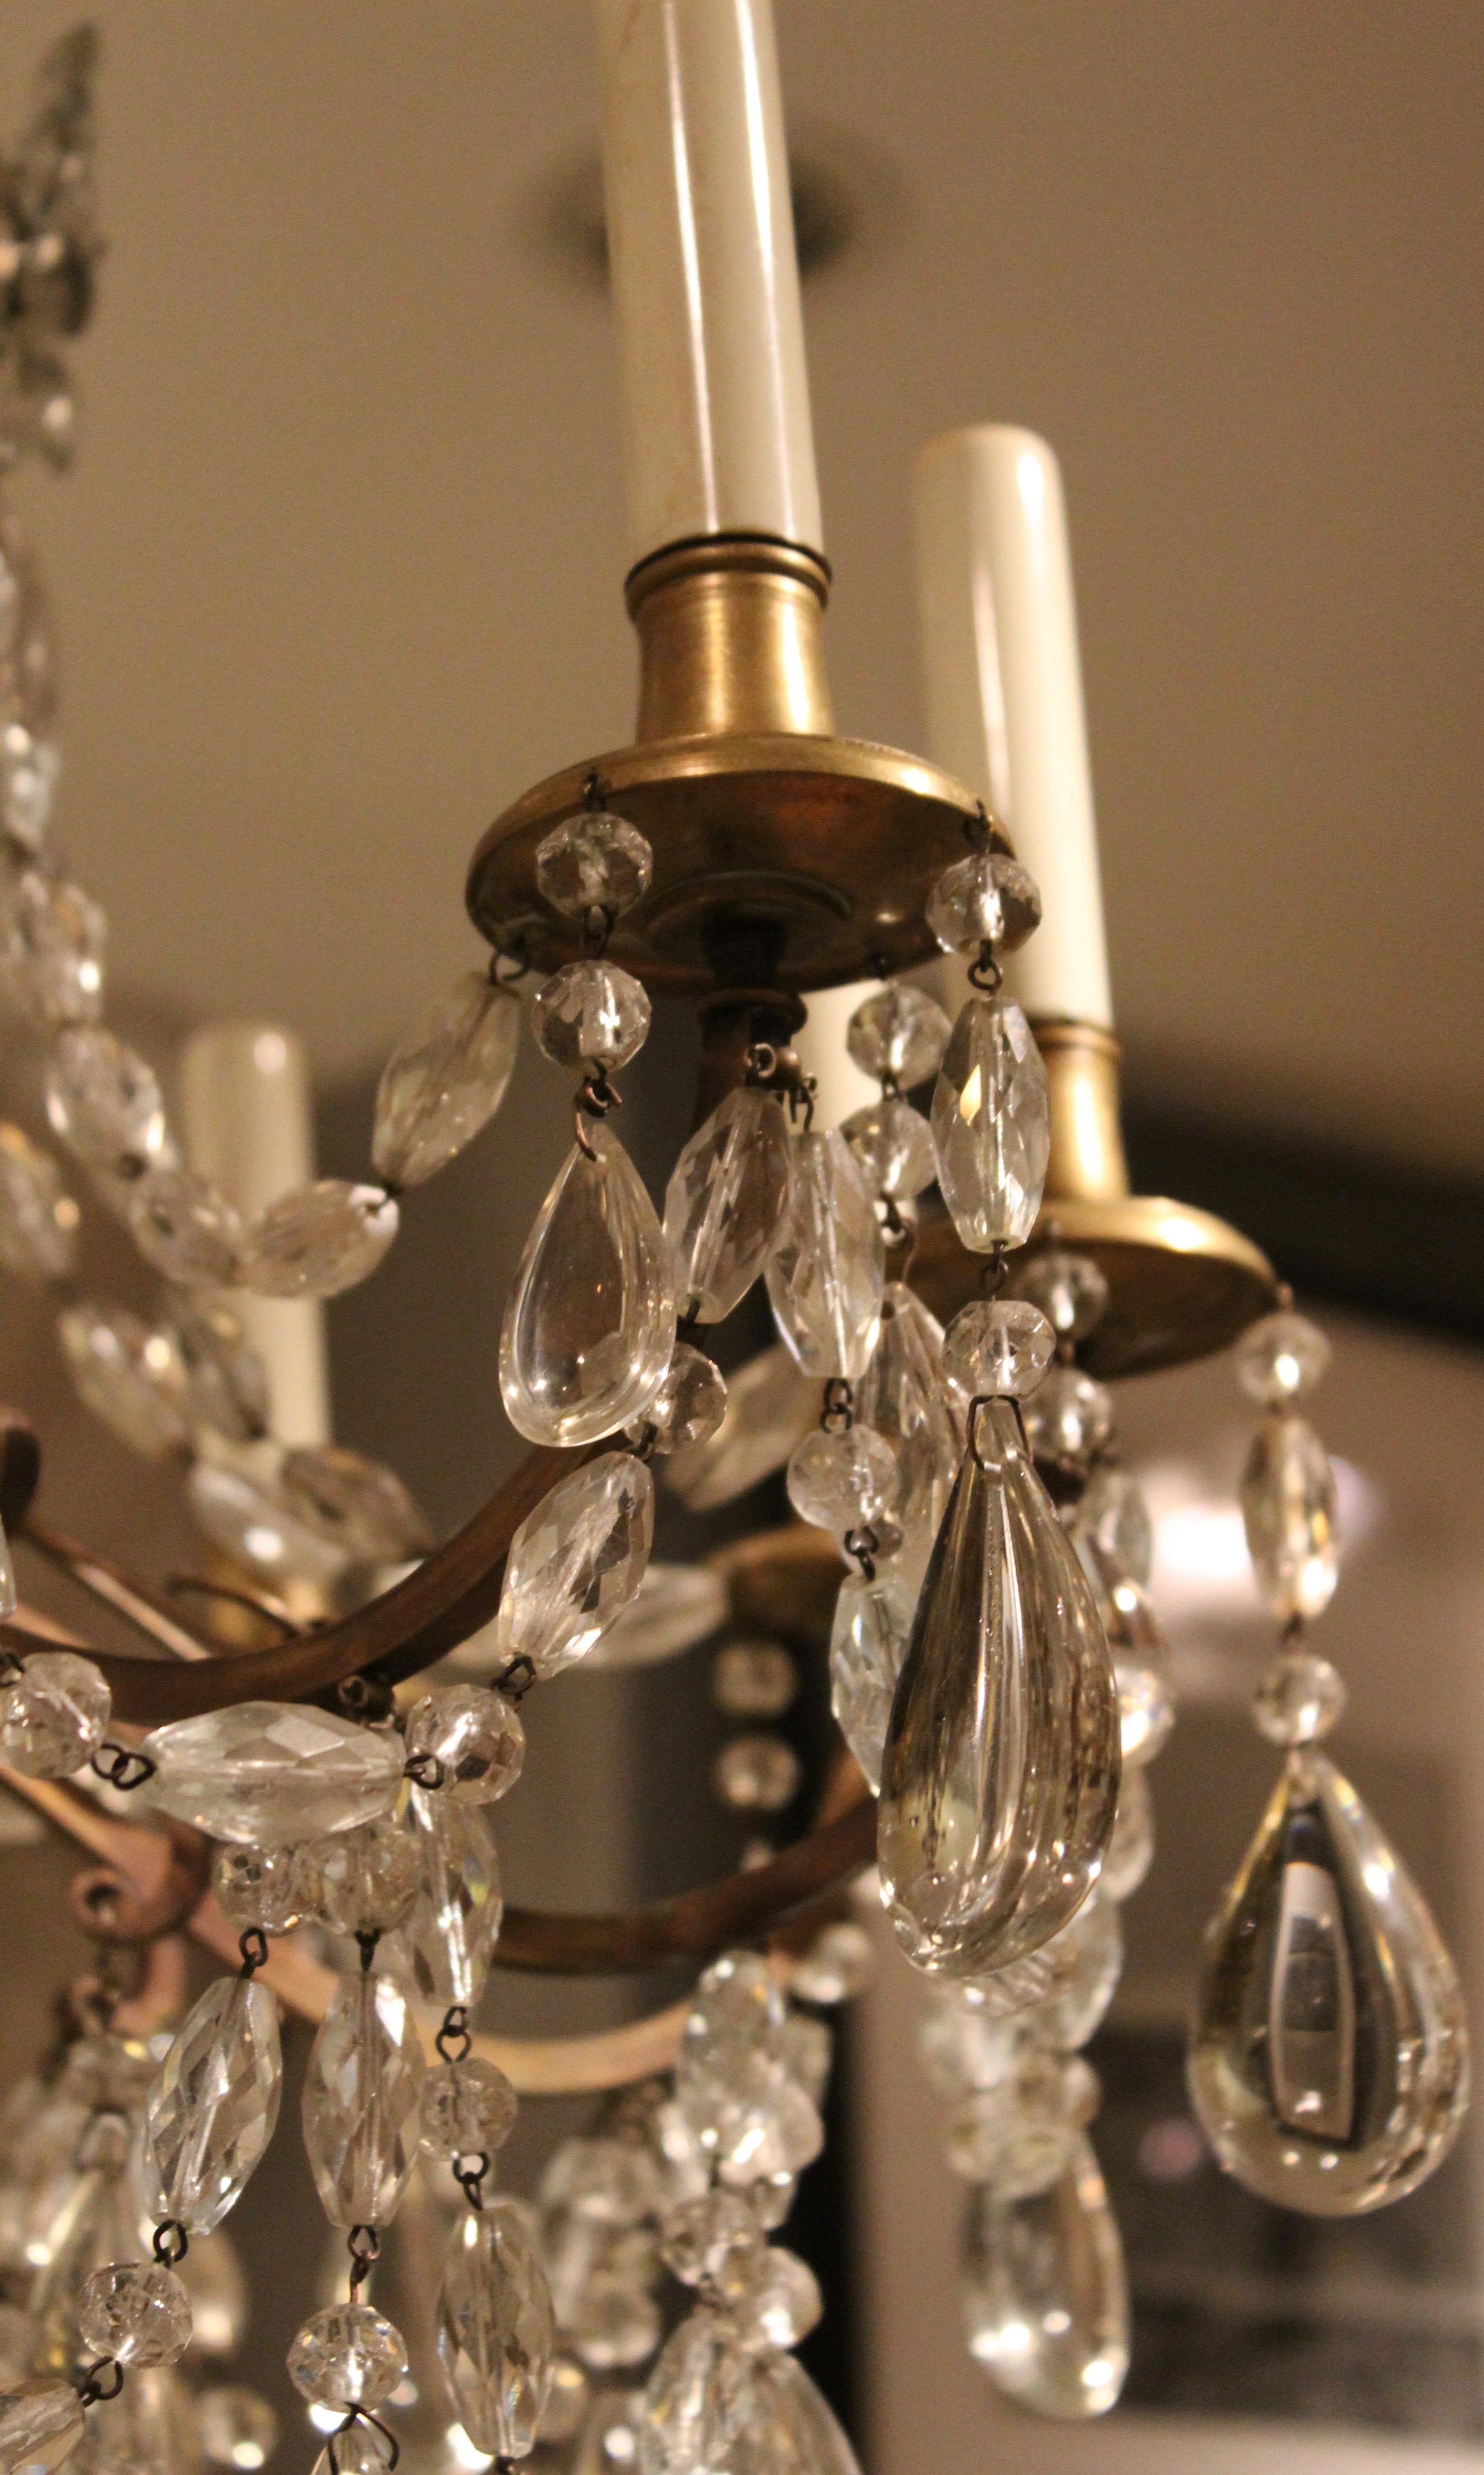 Early 20th Century French Baccarat Style Cut Crystal Drop Twelve Light Chandelier, circa 1900 For Sale